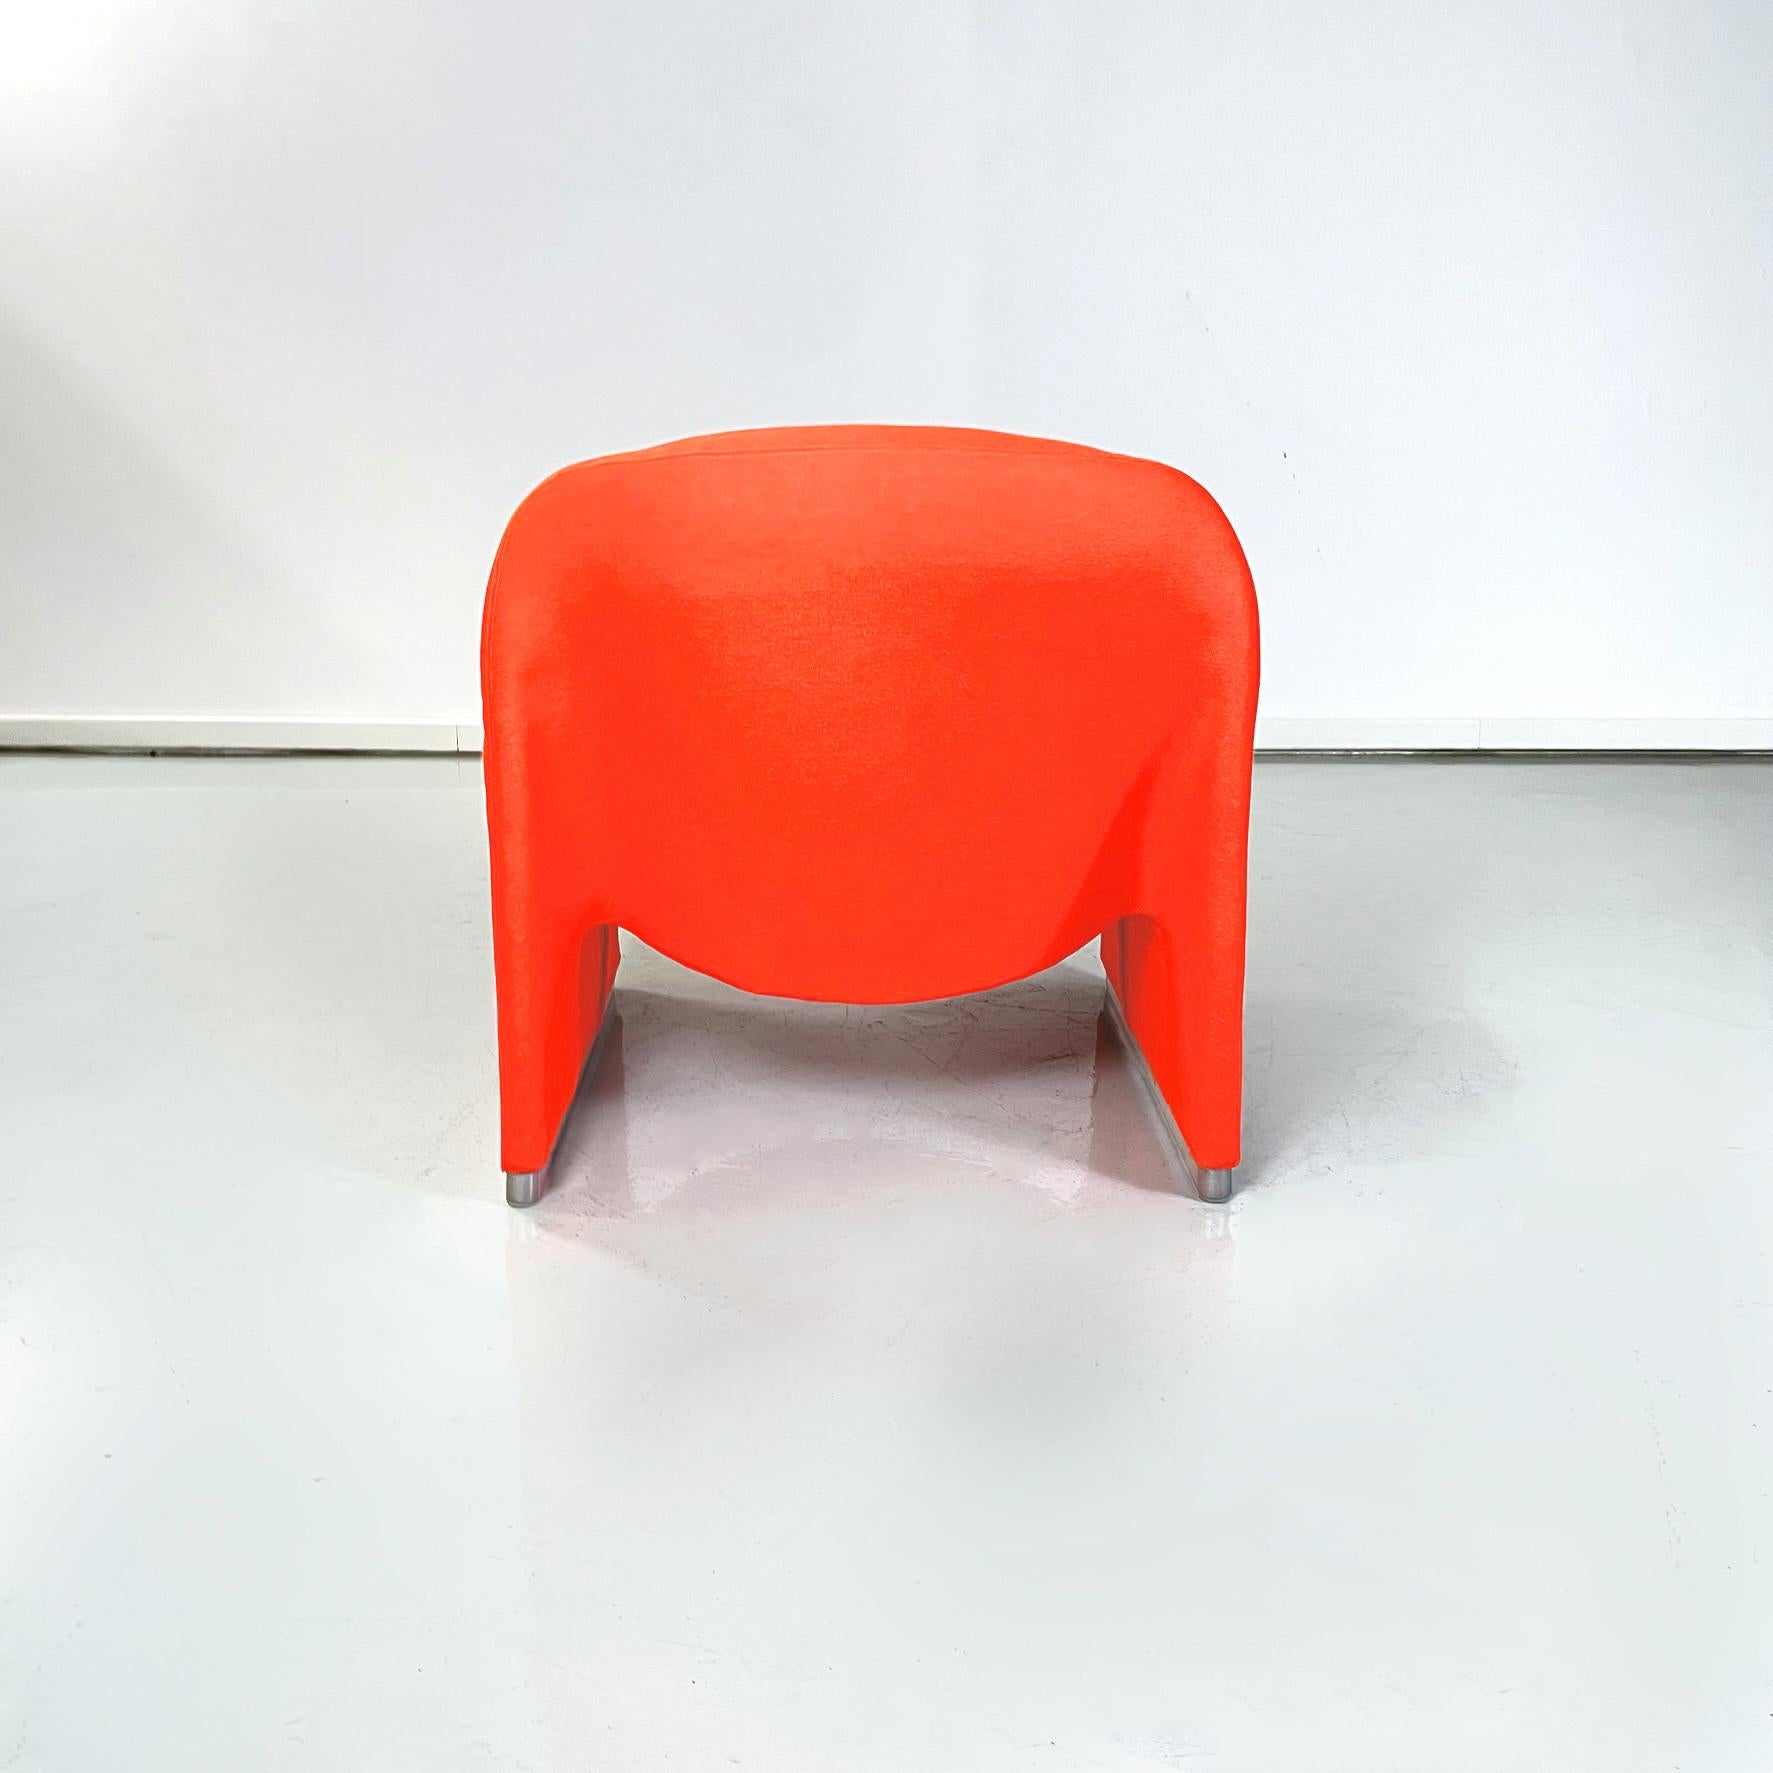 Metal Italian Modern Red Chairs Alky by Giancarlo Piretti for Anonima Castelli, 1970s For Sale